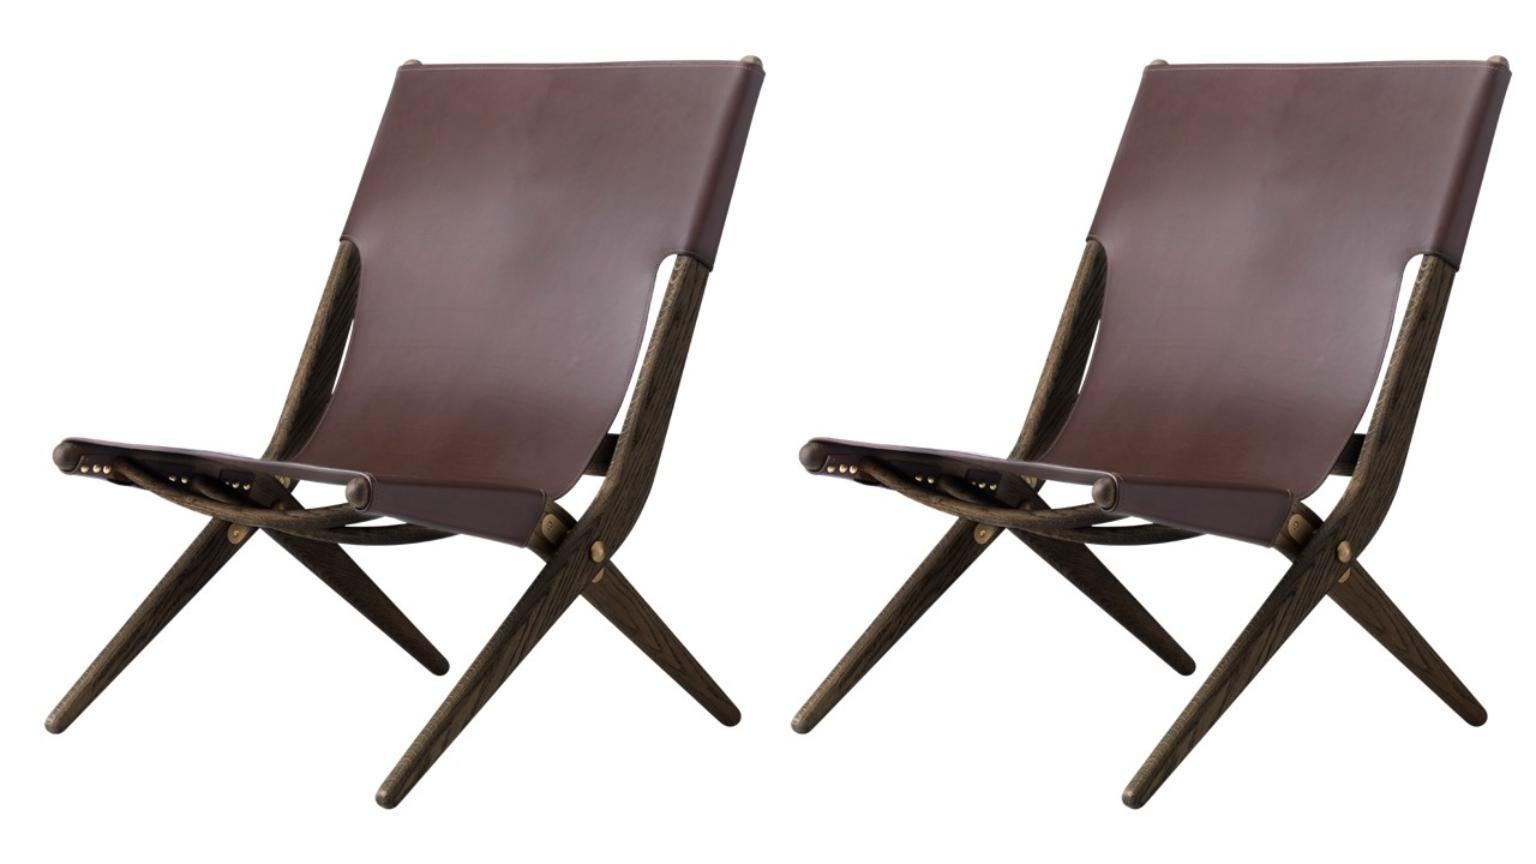 Set of 2 brown stained oak and brown leather Saxe chairs by Lassen
Dimensions: W 60 x D 67 x H 84 cm 
Materials: leather, oak.

Mogens Lassen was perceived as ‘the naughty boy in class’, but he aimed for perfection in each design project. His